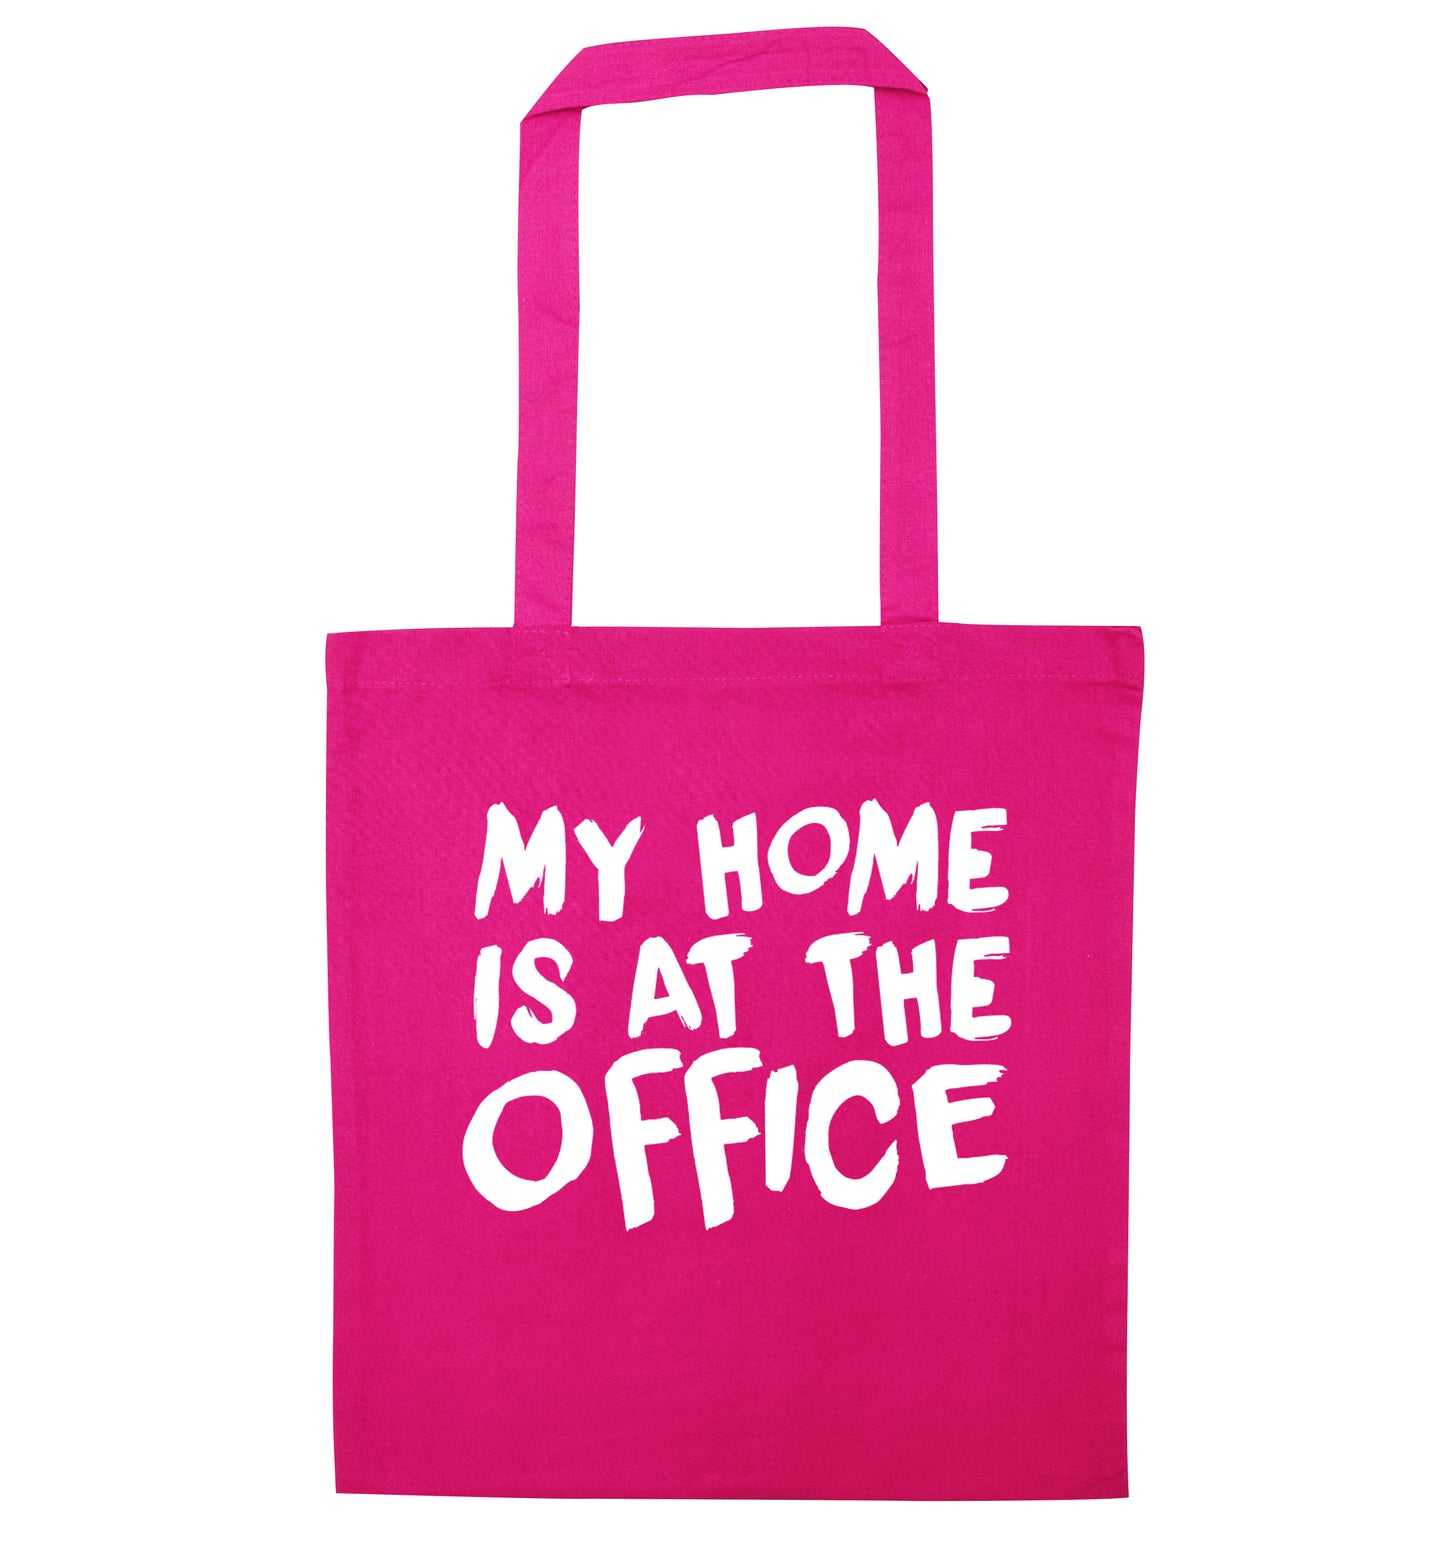 My home is at the office pink tote bag